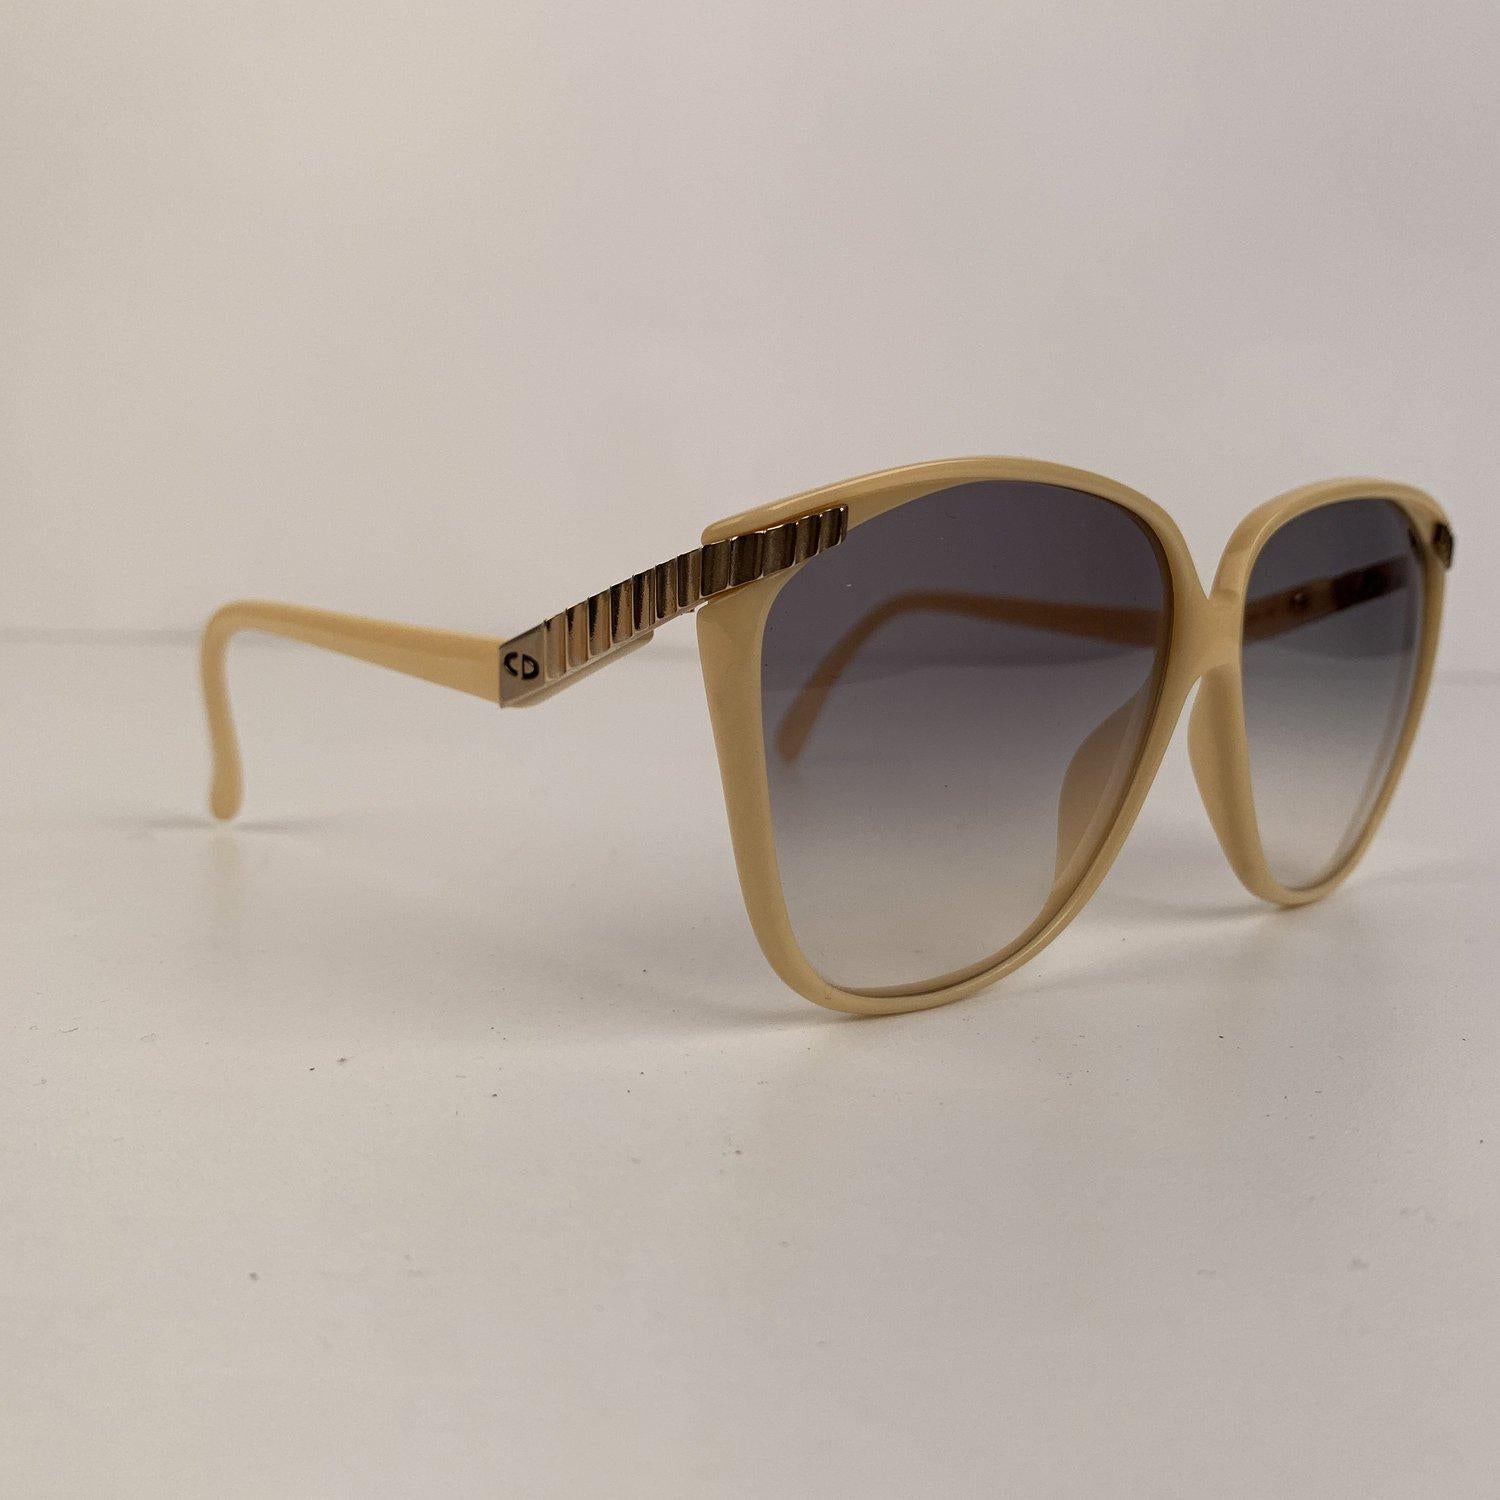 Original vintage oversized sunglasses from the late early 1980s. Frame made in France. Beige frame with gold metal finish on the top front and sides and 